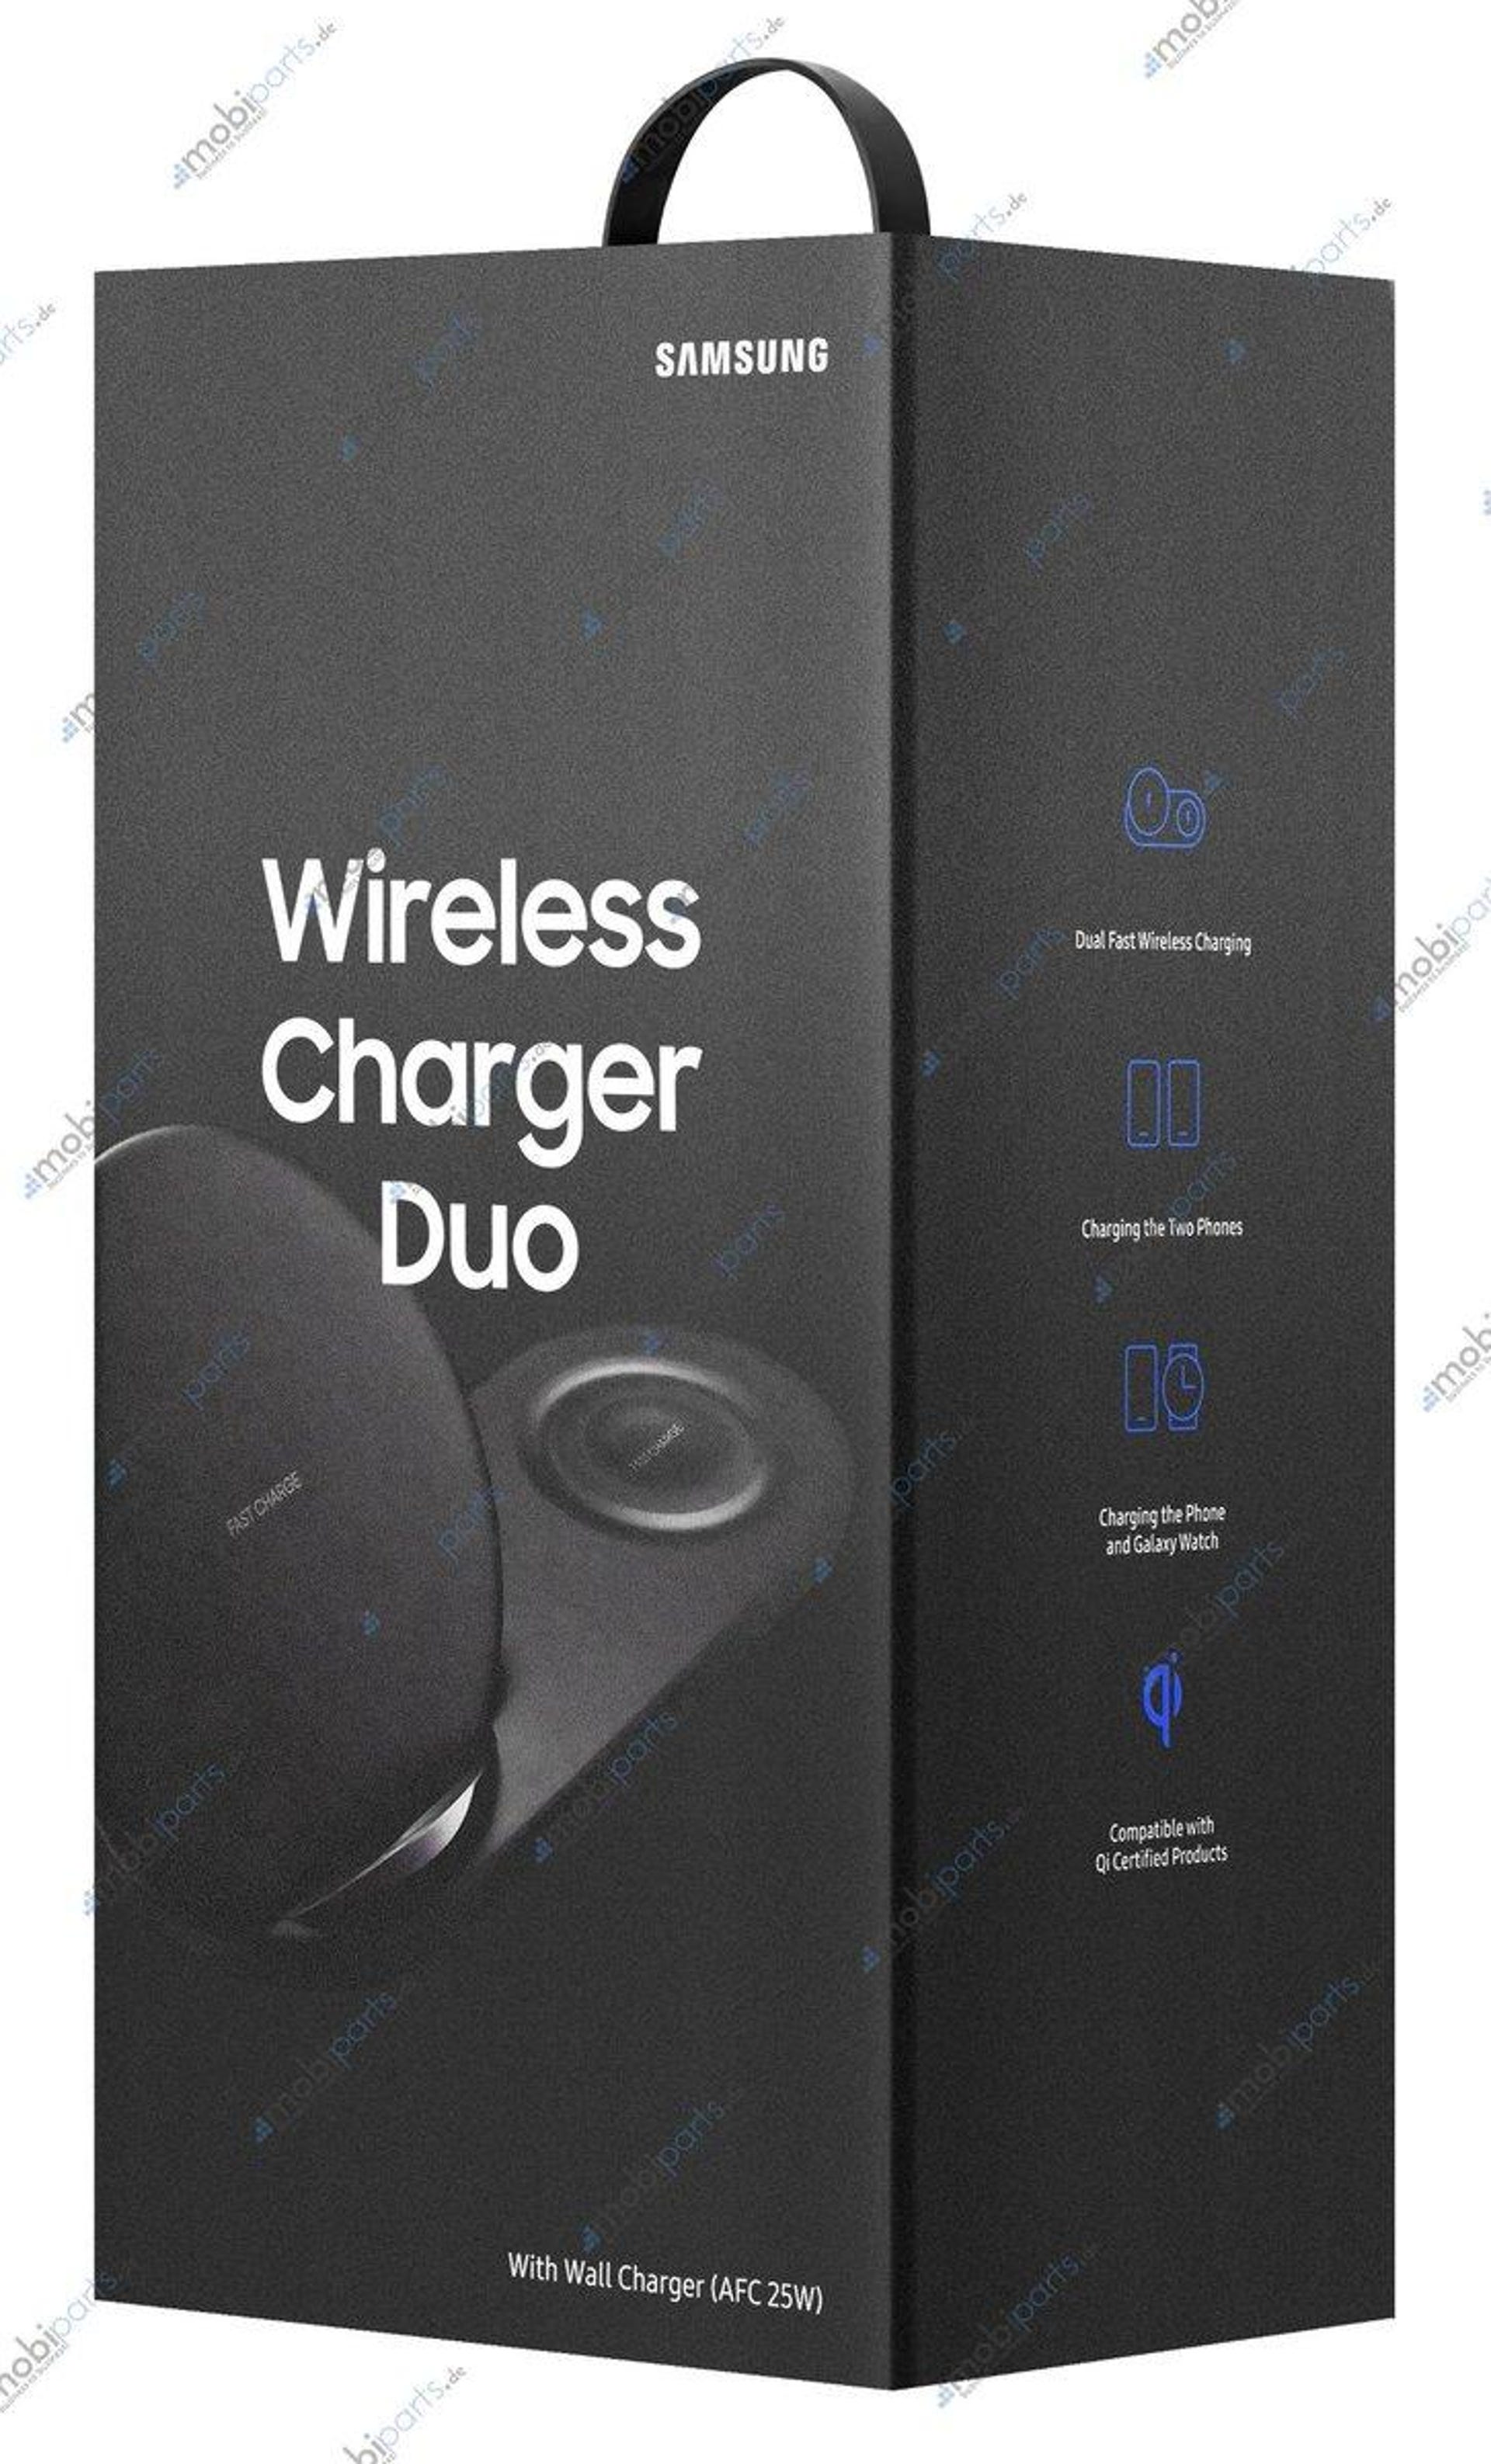 samsung-wireless-charger-duo-roland-quandt